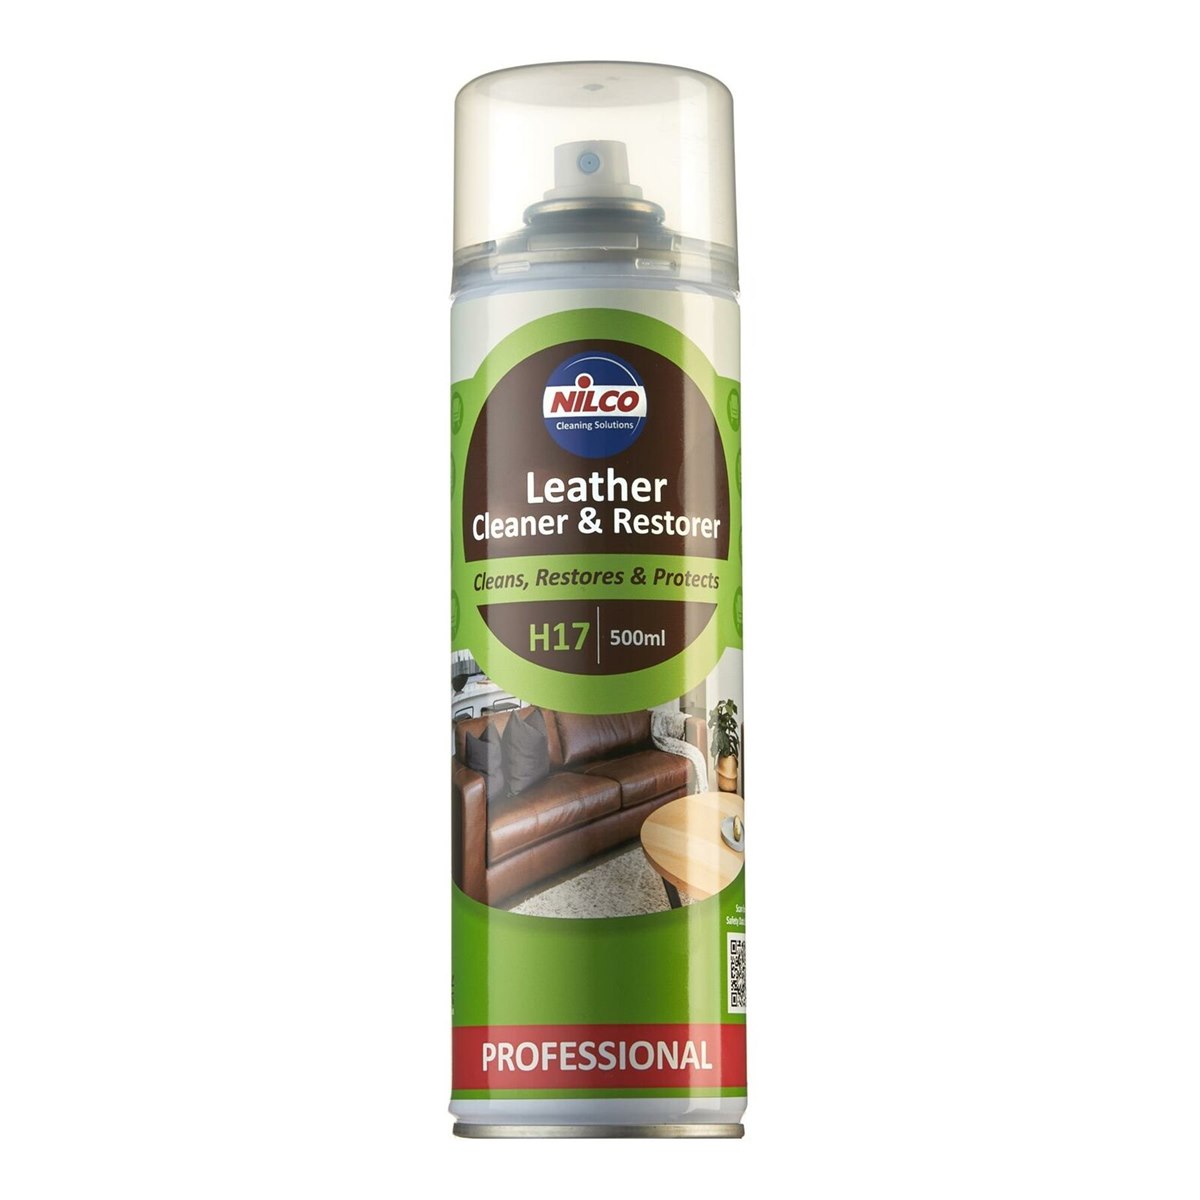 Nilco Leather Cleaner and Restorer Spray H17 500ml